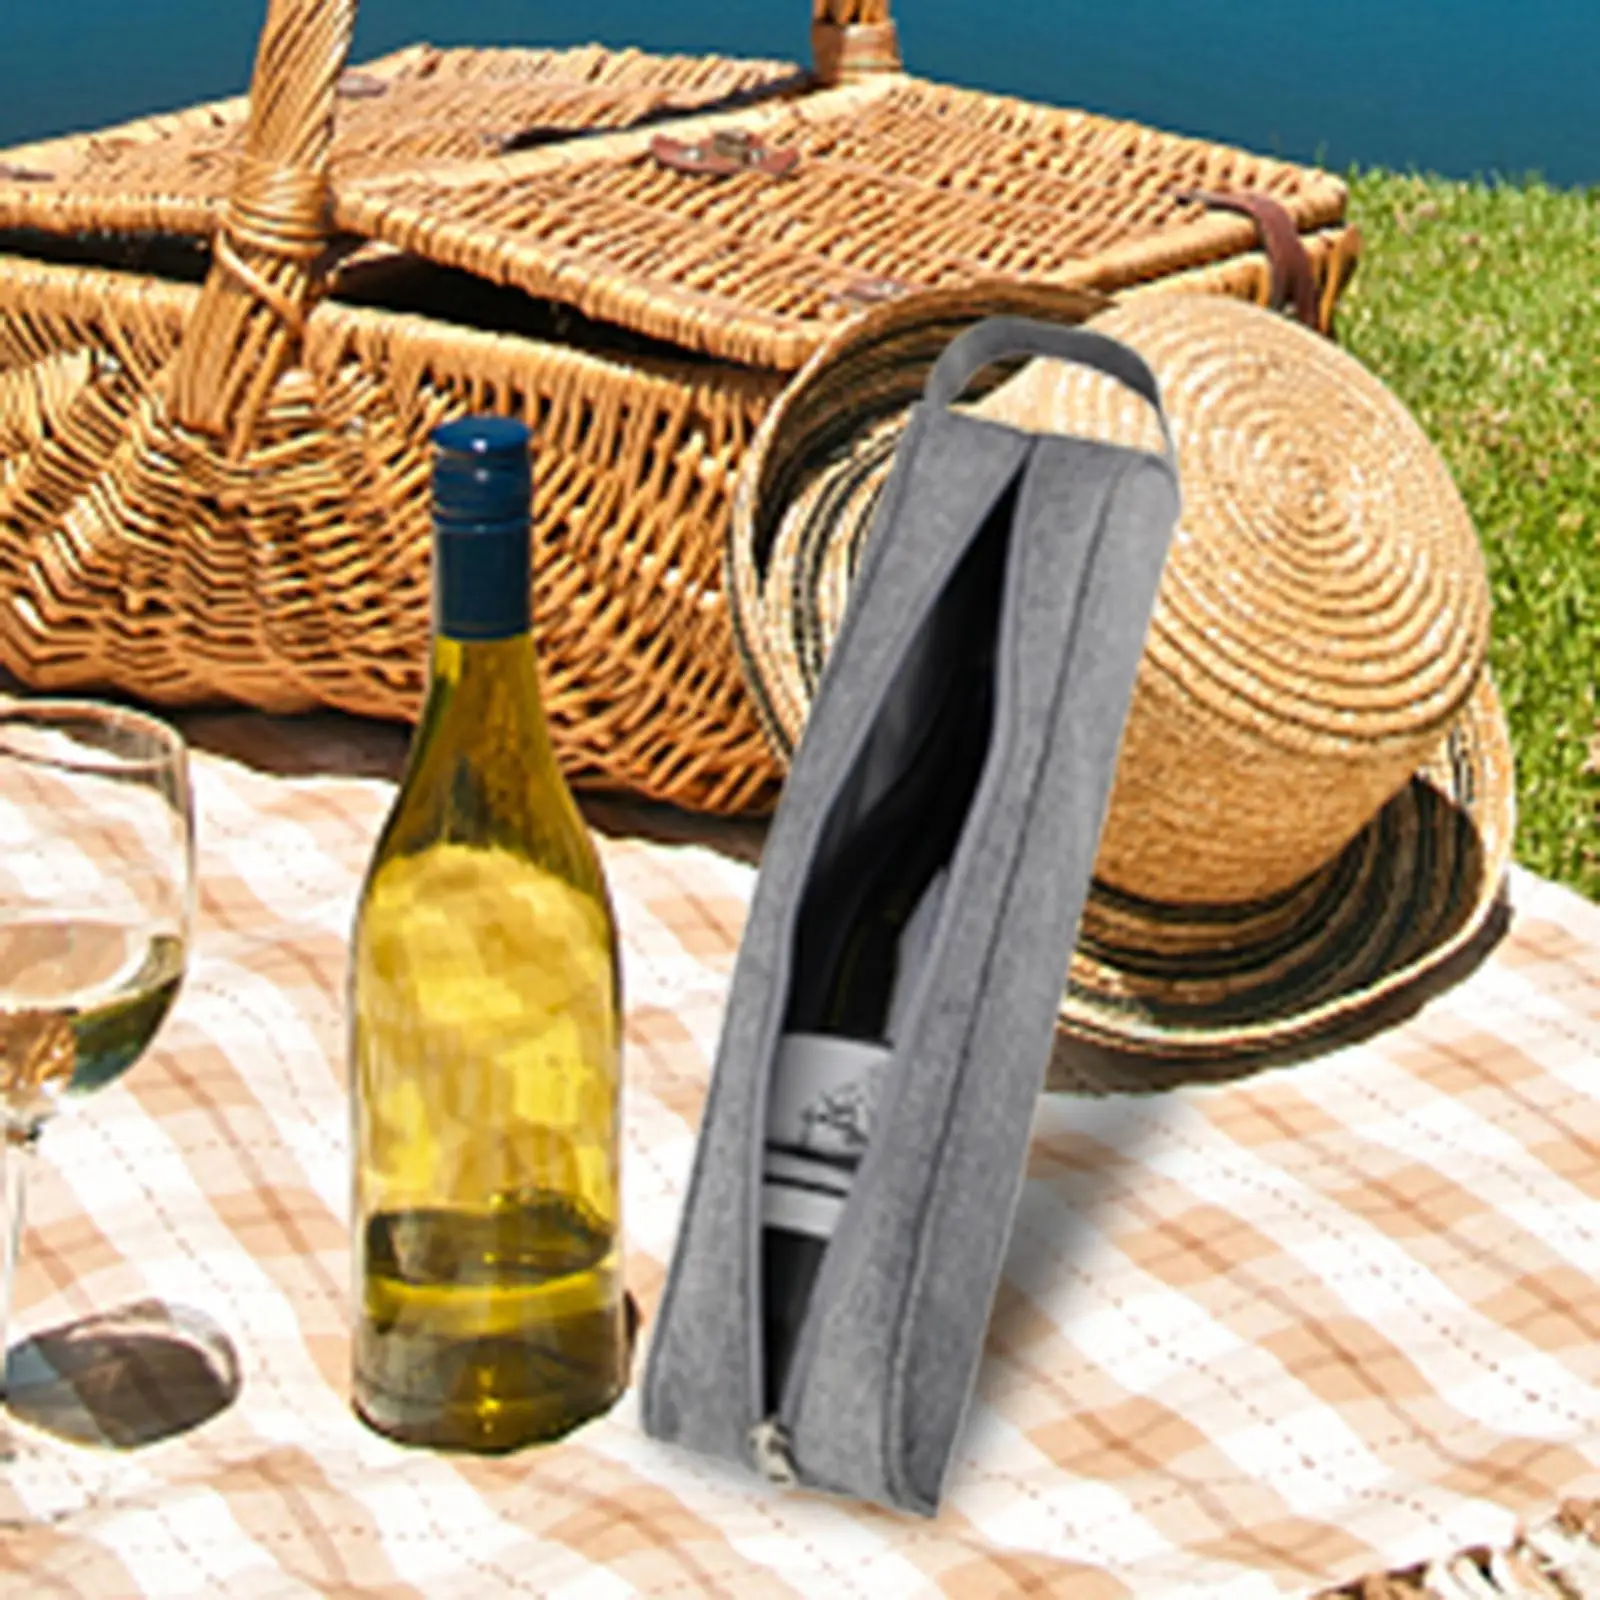 Single Bottle Wine Tote Bag Waterproof Gift Insulated Wine Cooler Bag Thermal Wine Carrier for Camping Picnic Outdoor Sports